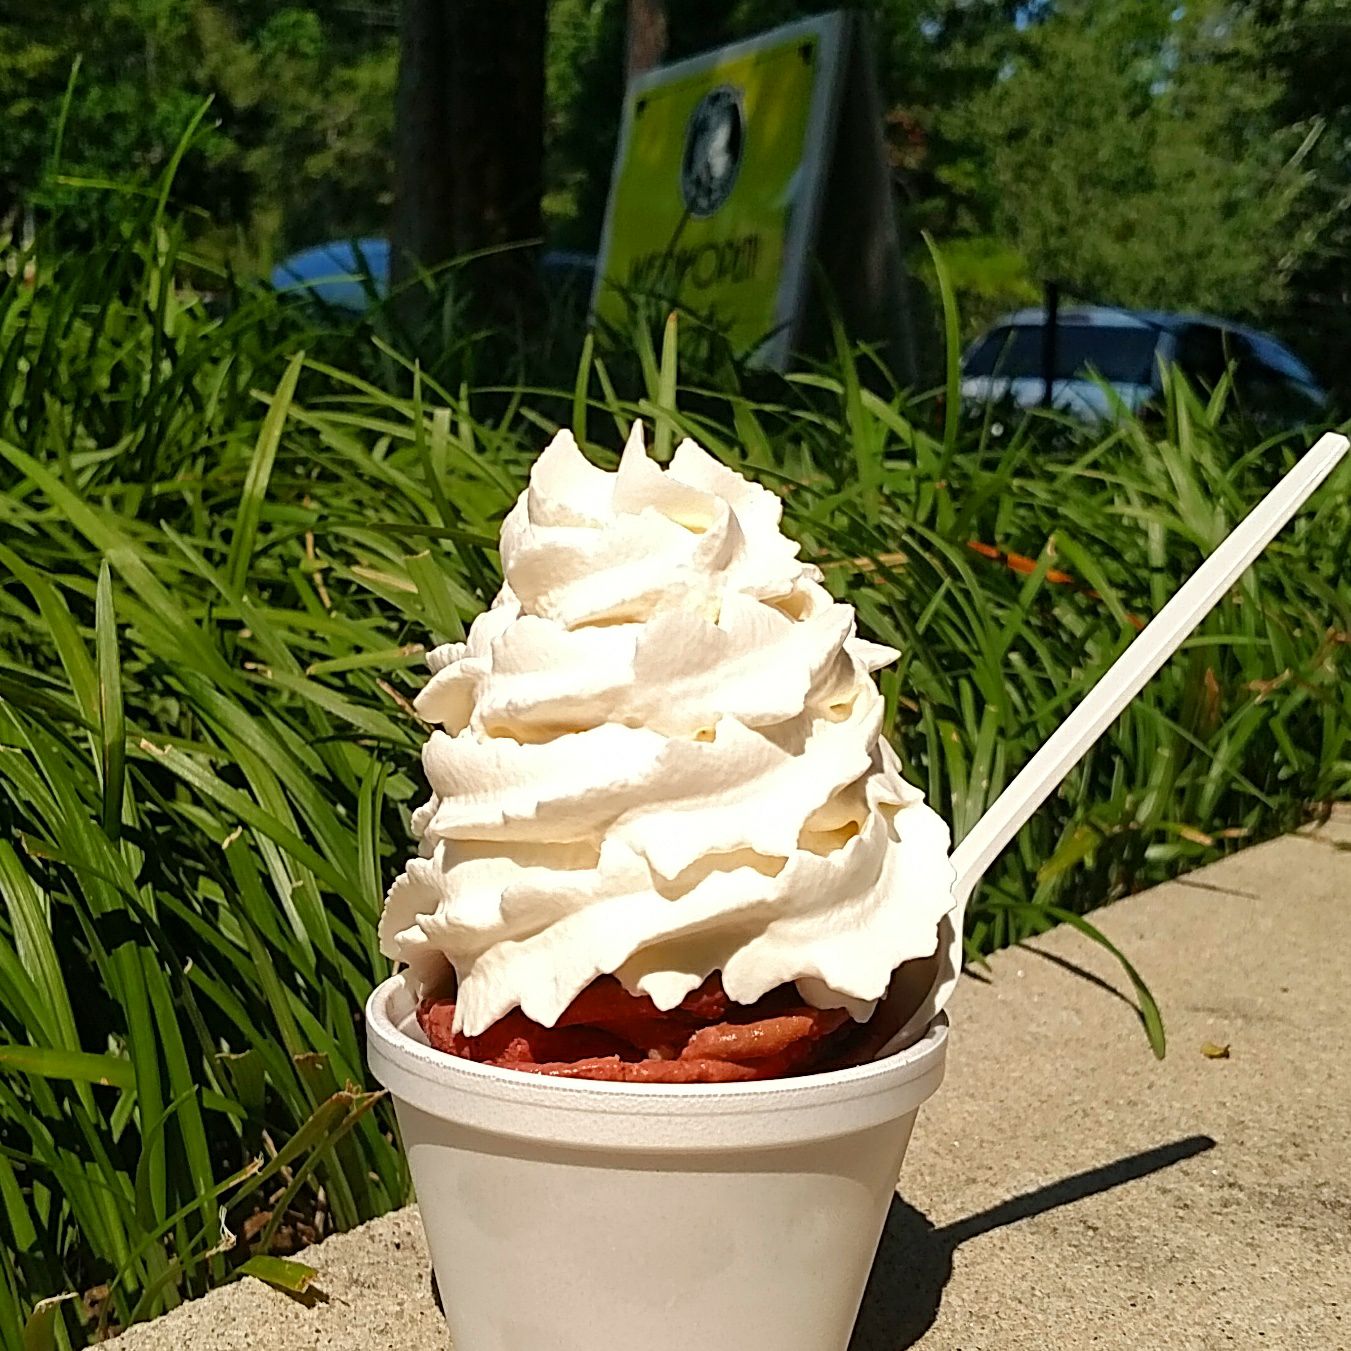 Ice cream in a cup, topped with whipped cream